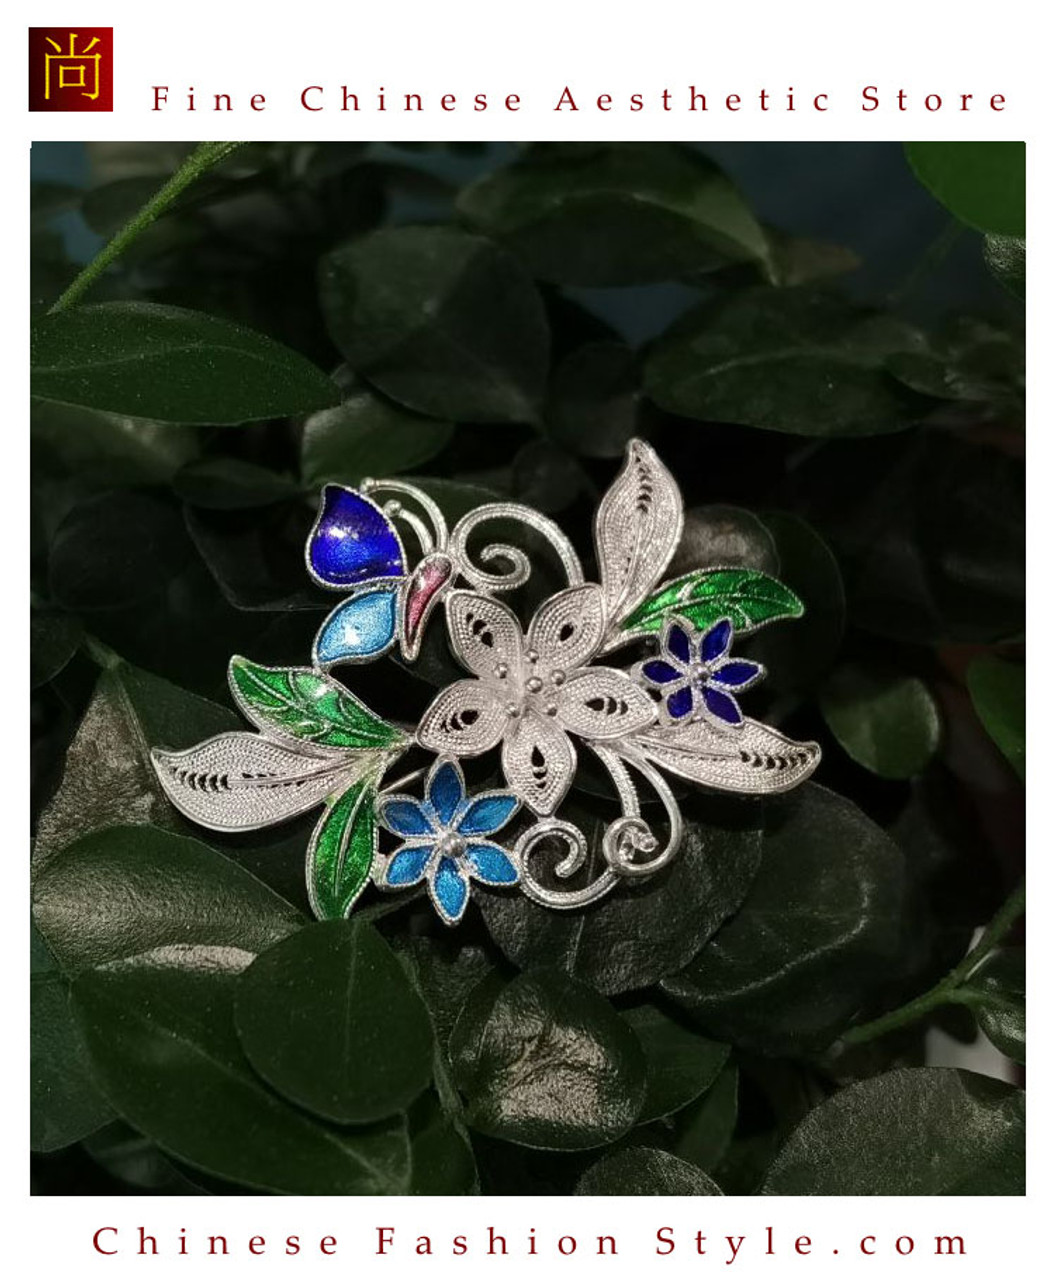 100% Handcrafted Miao Hmong Pure Silver Pendant 999 Filigree Green Enamel  Brooch For Women Authentic Flower Design Vintage Antique Style - Fair Trade  #101 - Chinese Fashion Style . com